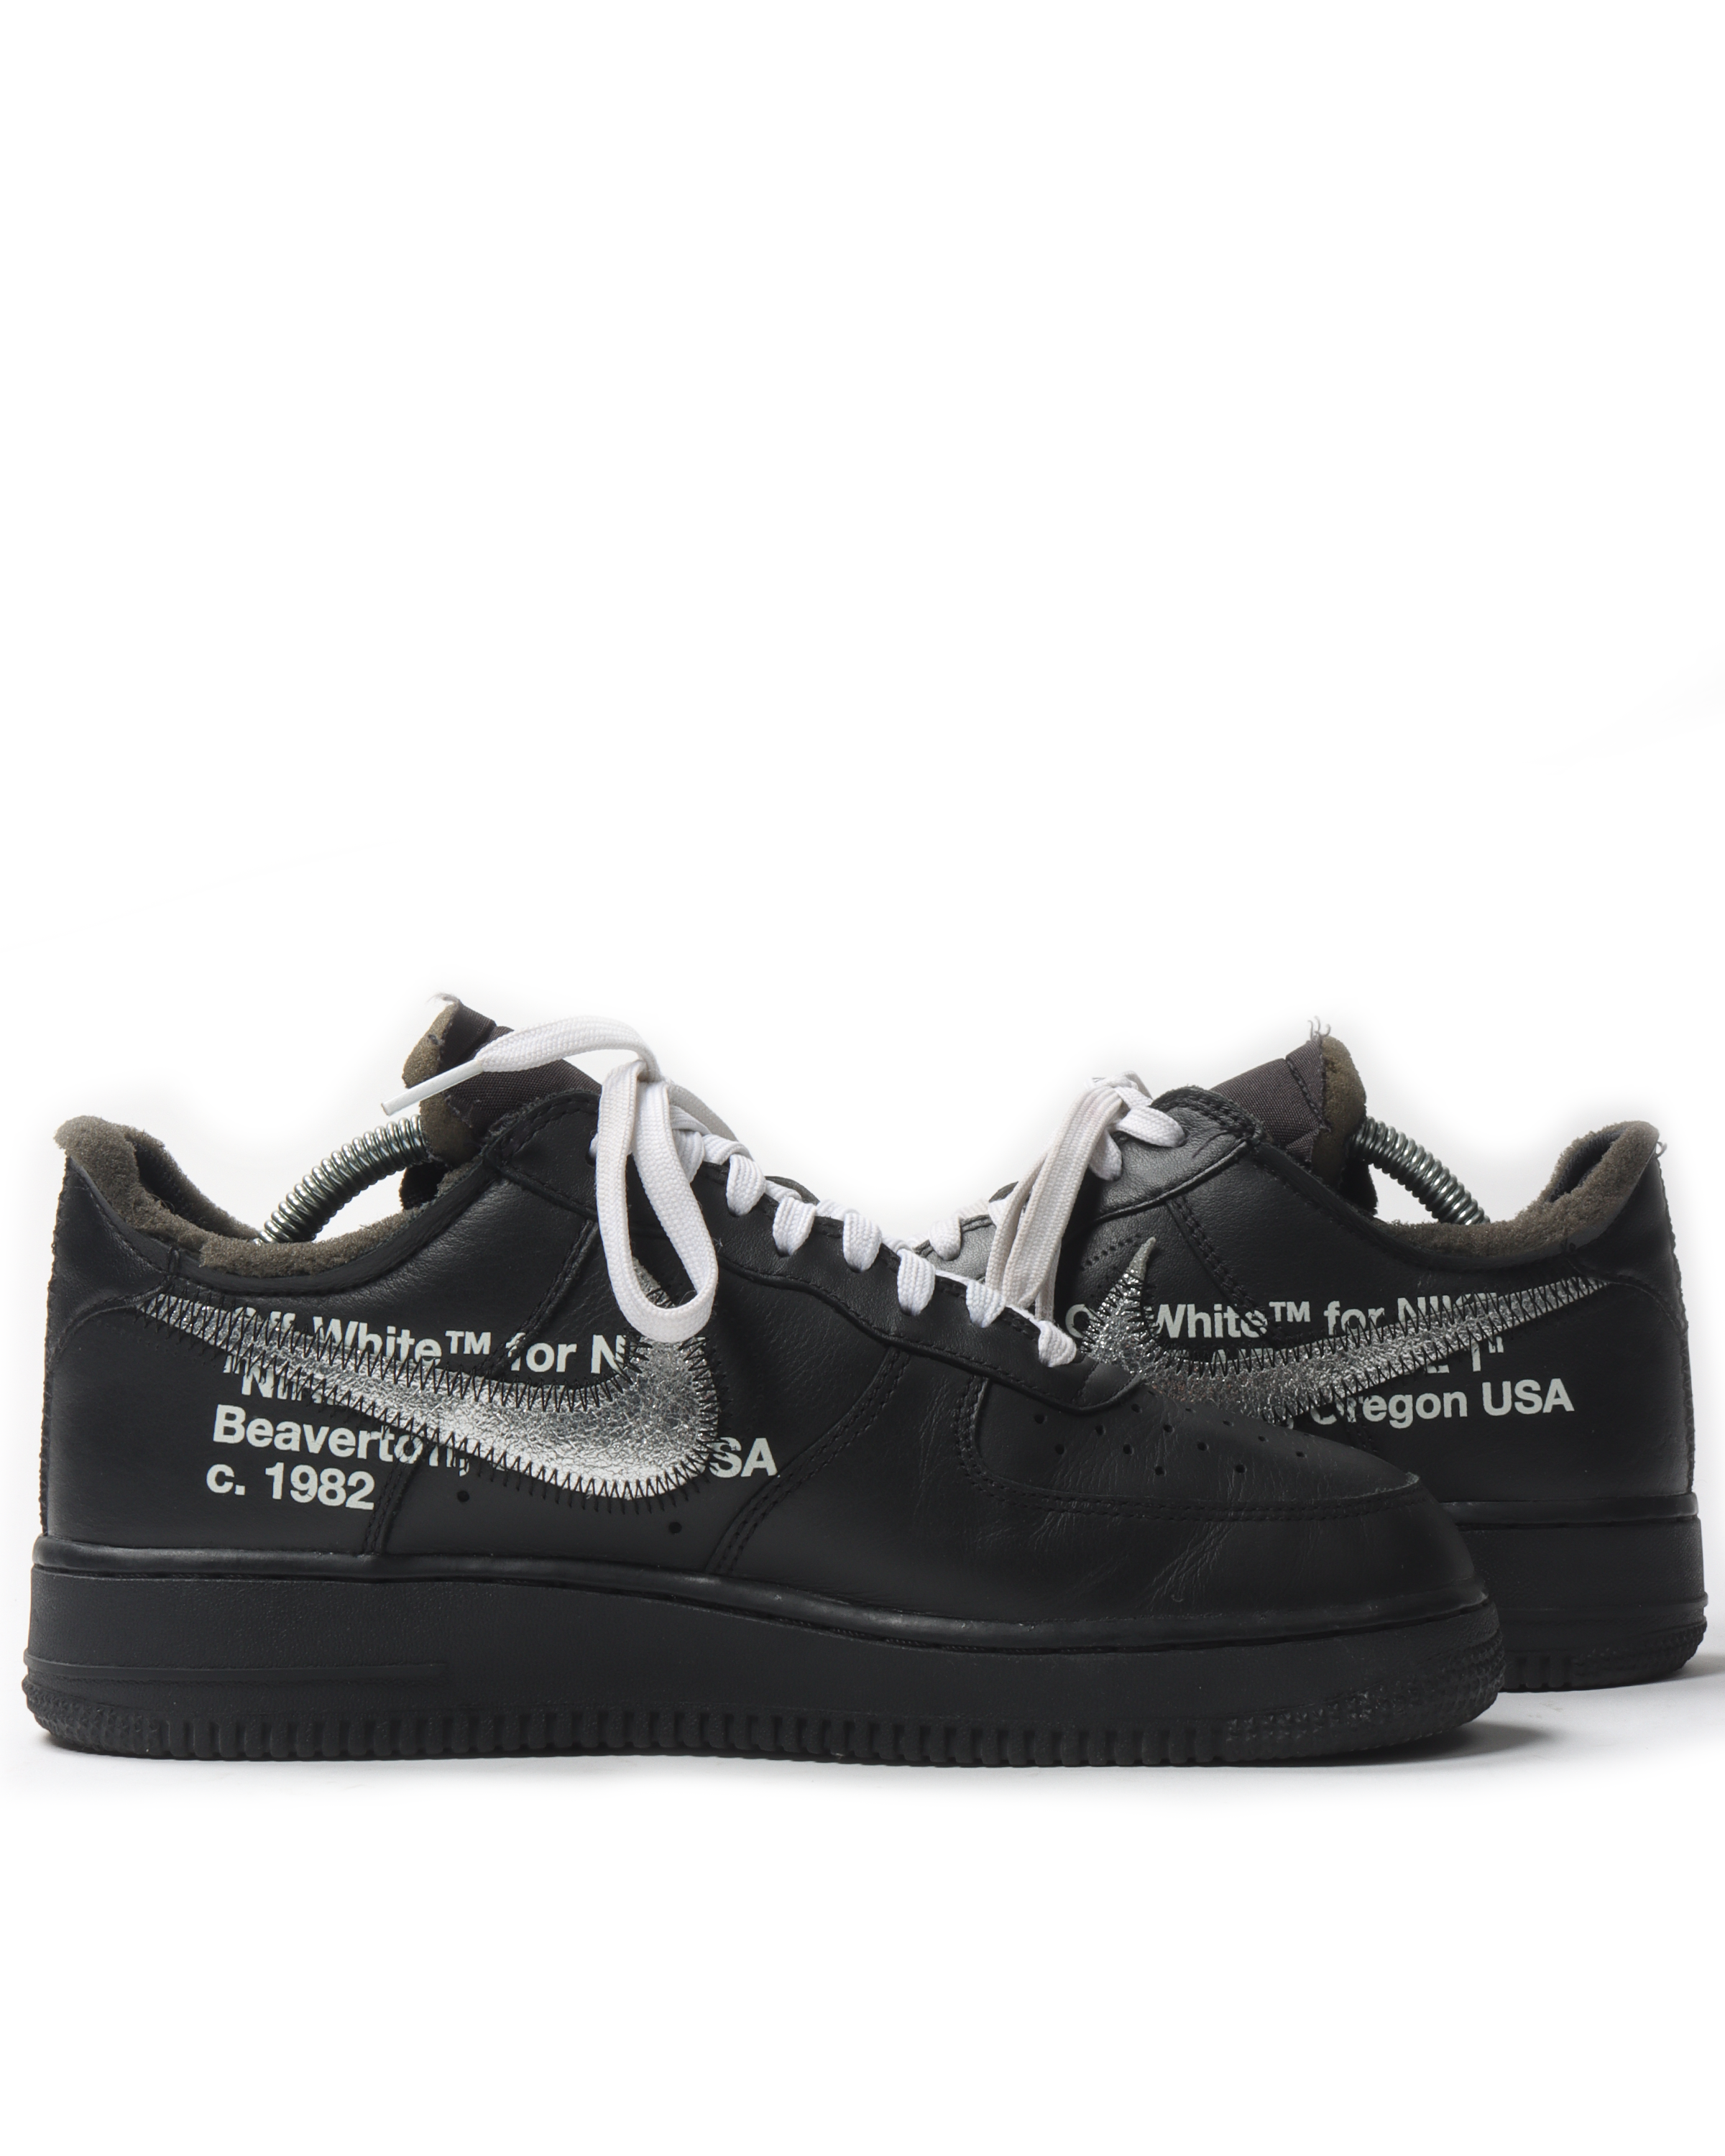 MOMA Air Force 1s